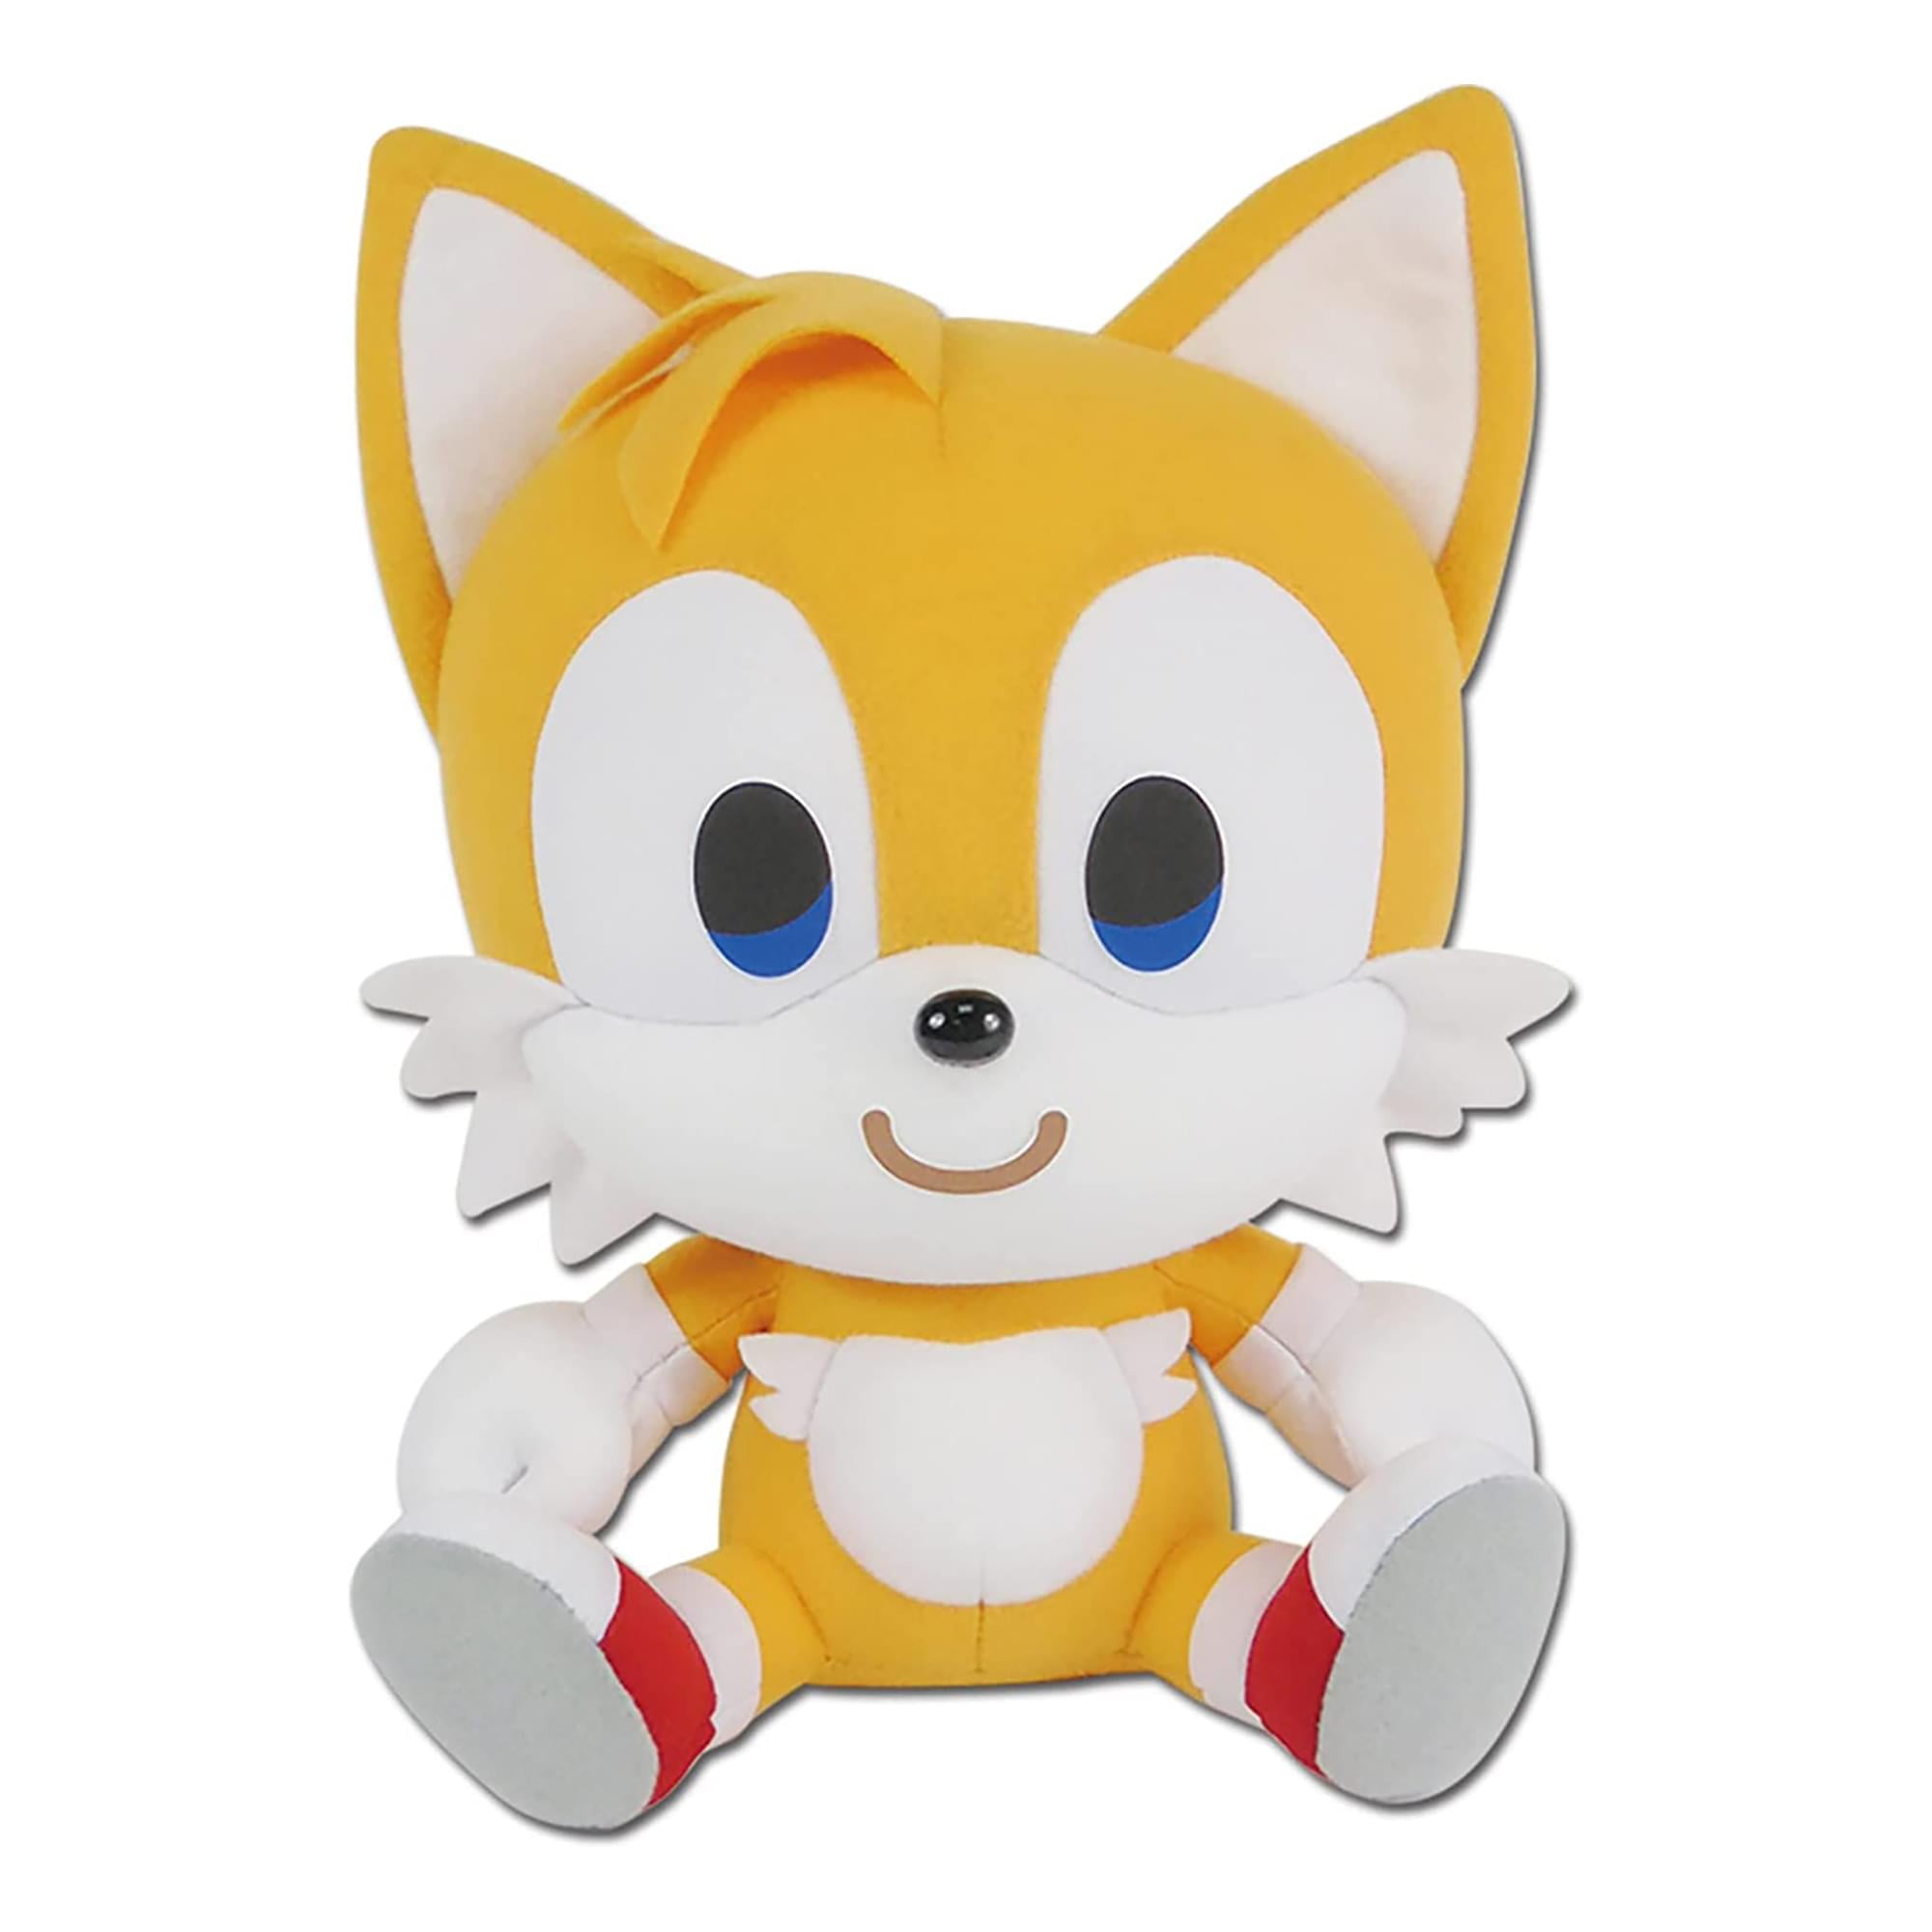 Free: Baby Sonic - Sonic And Tails Baby 